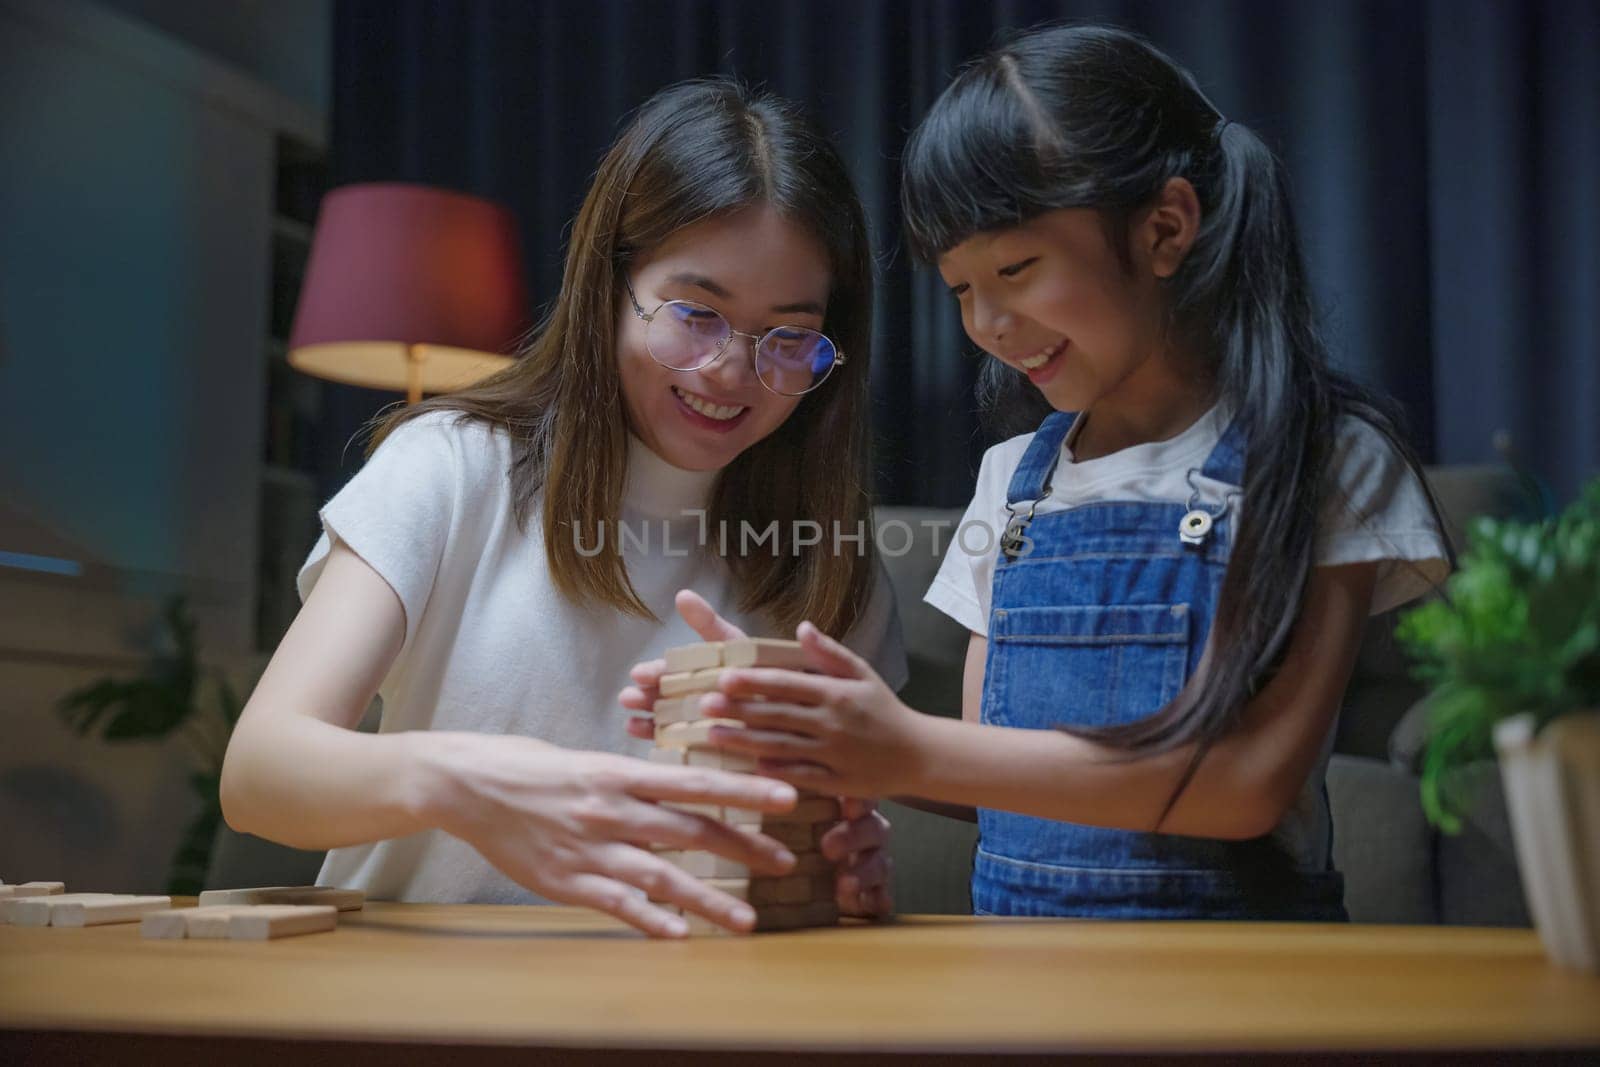 Asian young mother playing game in wood block with little daughter in home living room at night, Smiling woman help teach preschooler kid play build constructor tower of wooden blocks, family funny